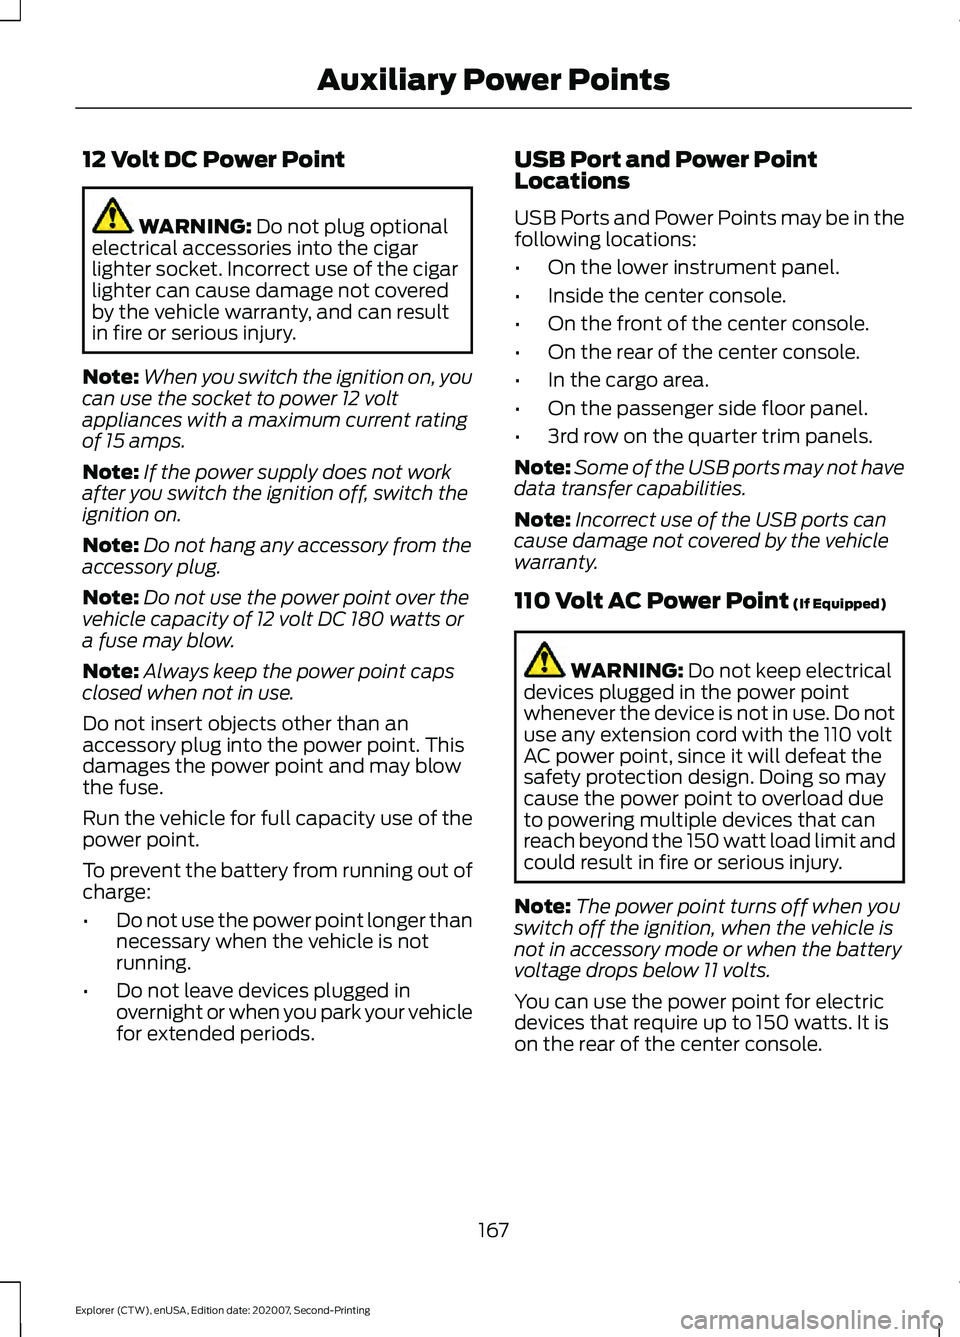 FORD EXPLORER 2021  Owners Manual 12 Volt DC Power Point
WARNING: Do not plug optional
electrical accessories into the cigar
lighter socket. Incorrect use of the cigar
lighter can cause damage not covered
by the vehicle warranty, and 